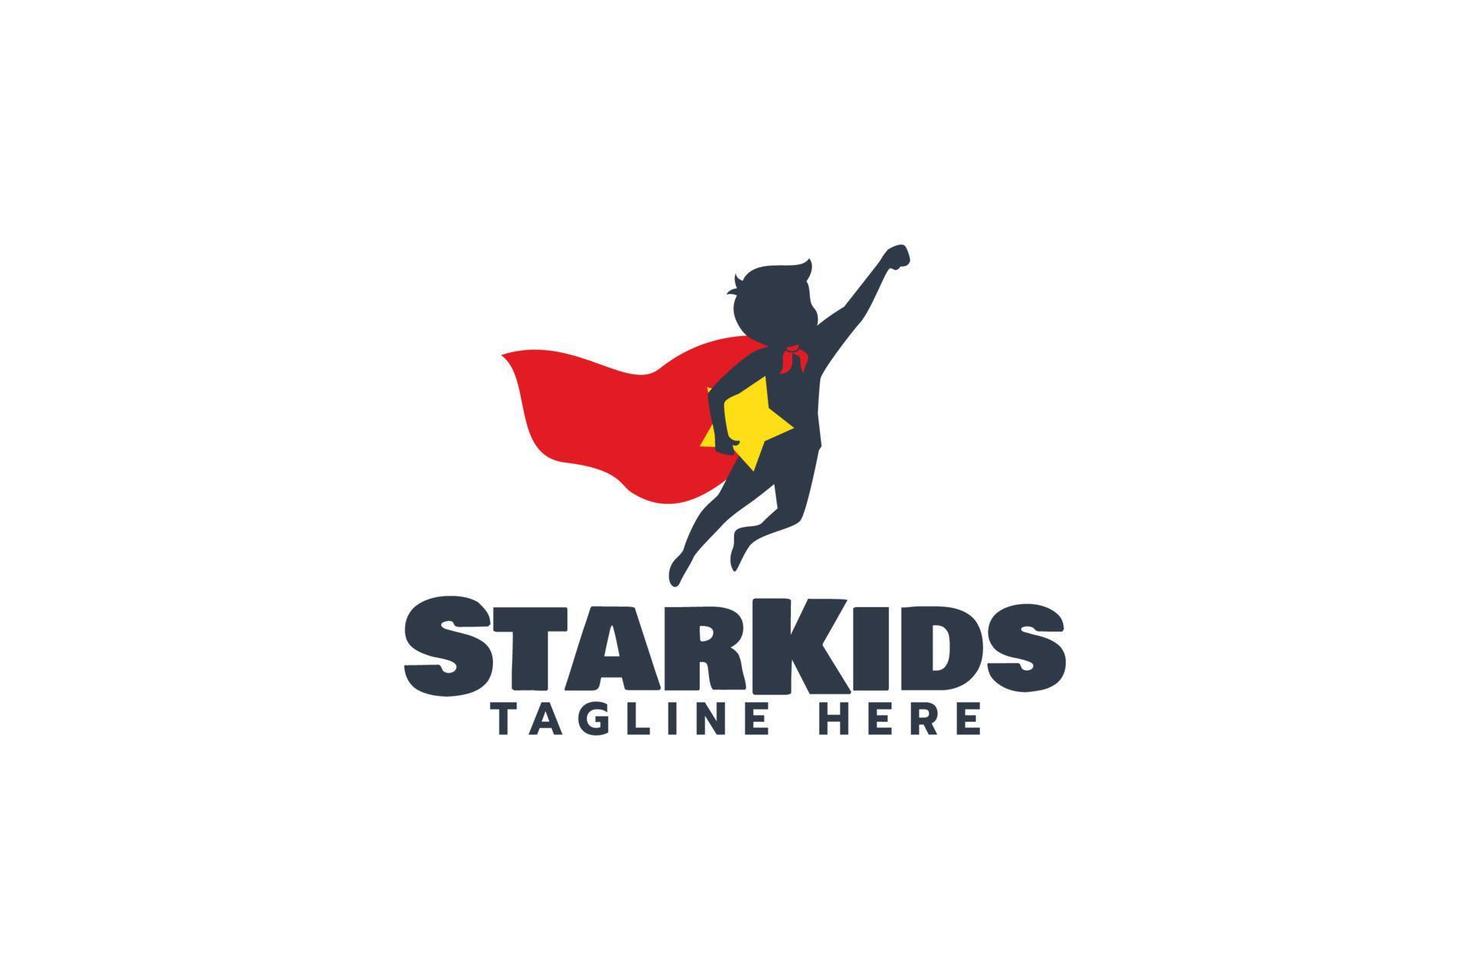 a simple logo with a super child jumping while holding a star vector